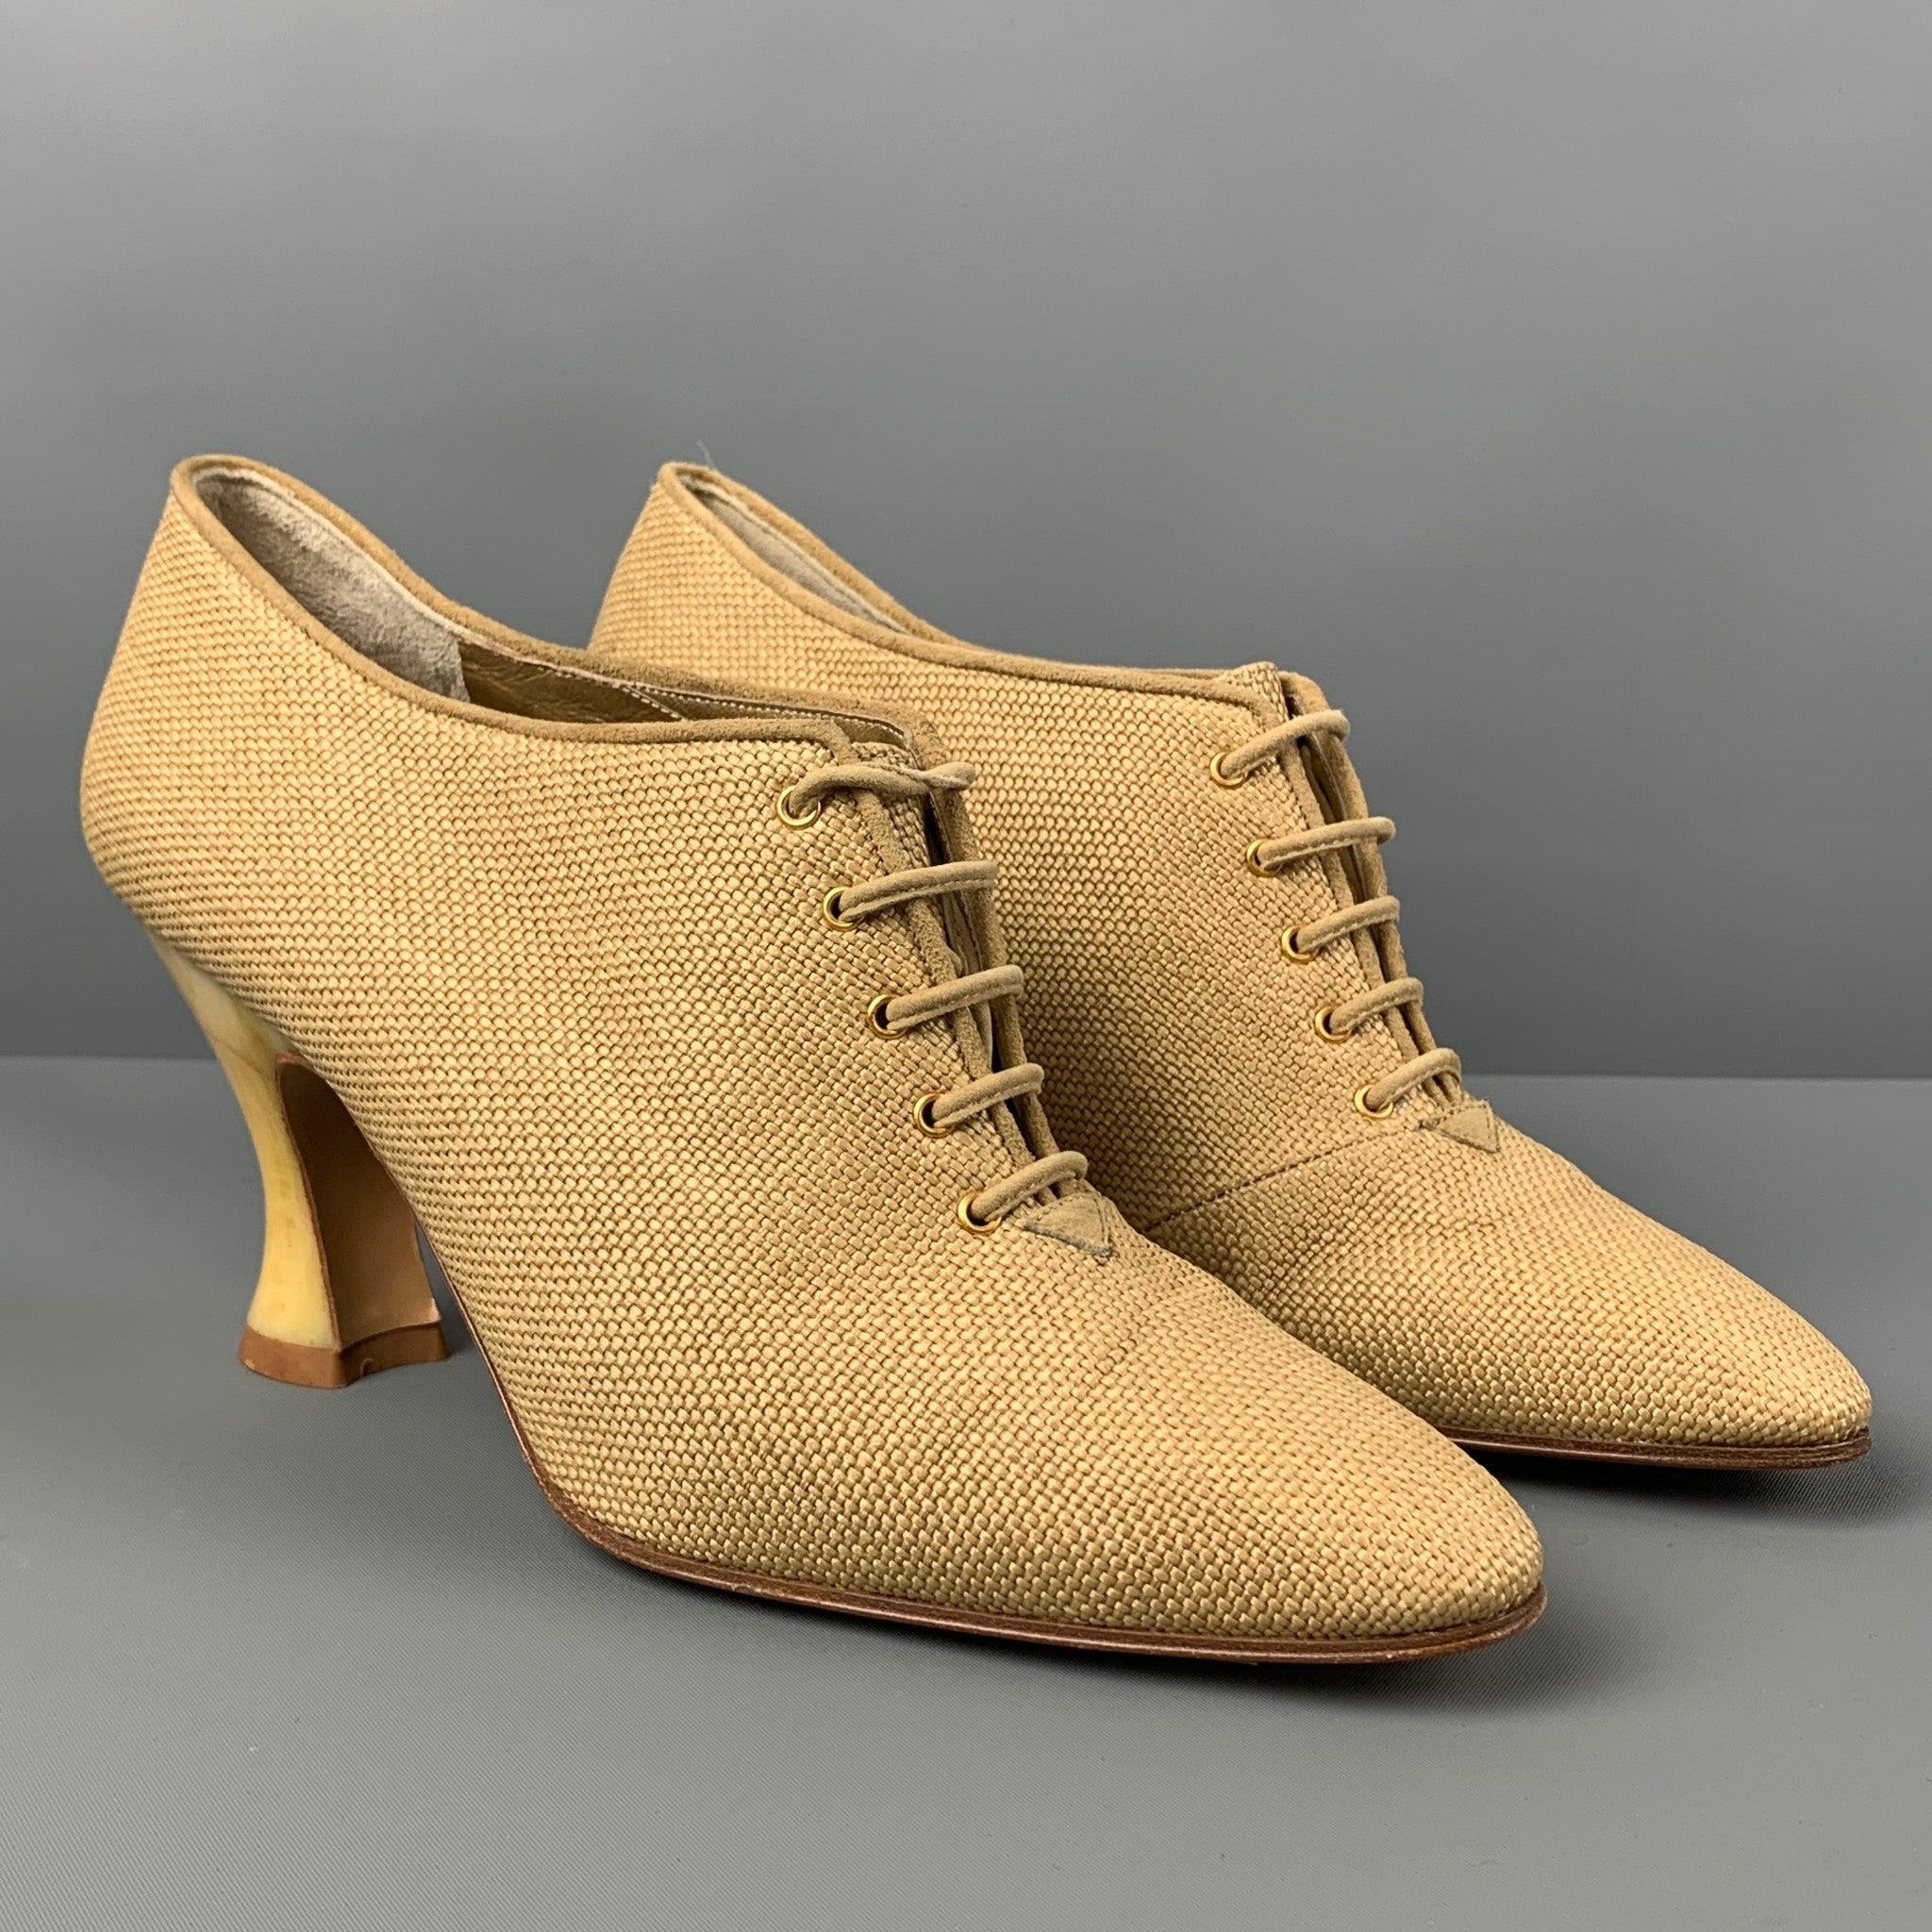 Vintage YVES SAINT LAURENT boots comes in a beige woven material featuring acetate heel and a lace up closure. Made in Italy.
Very Good
Pre-Owned Condition. 

Marked:   7.5 M  

Measurements: 
  Heel: 3.25 inches 
  
  
 
Reference: 120765
Category: